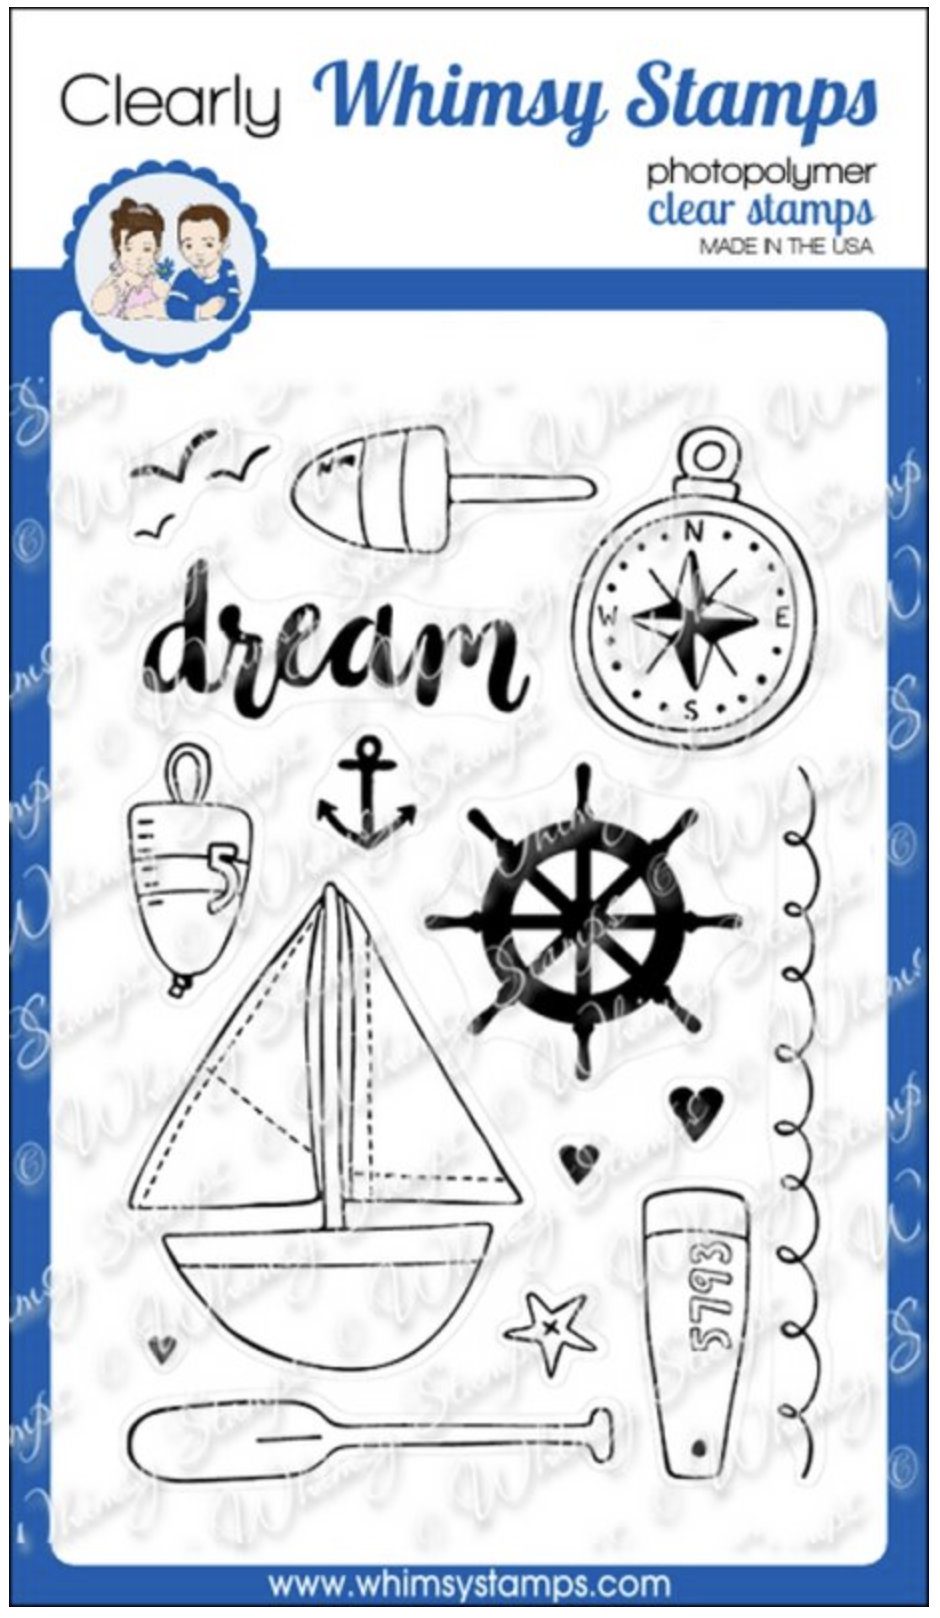 whimsystamps_2